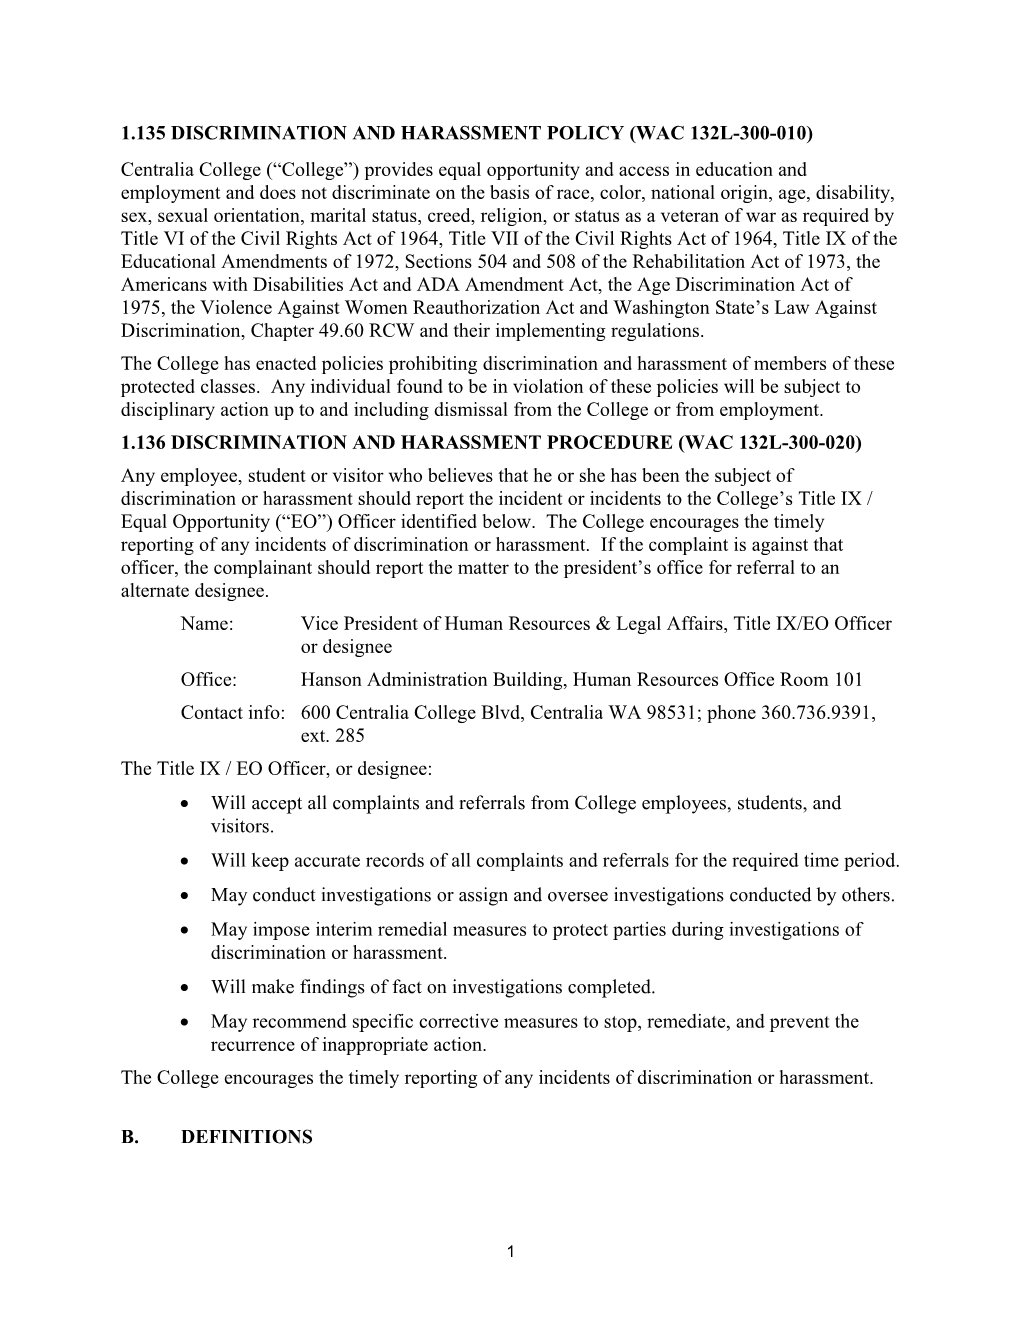 1.135 Discrimination and Harassment Policy (Wac 132L-300-010)